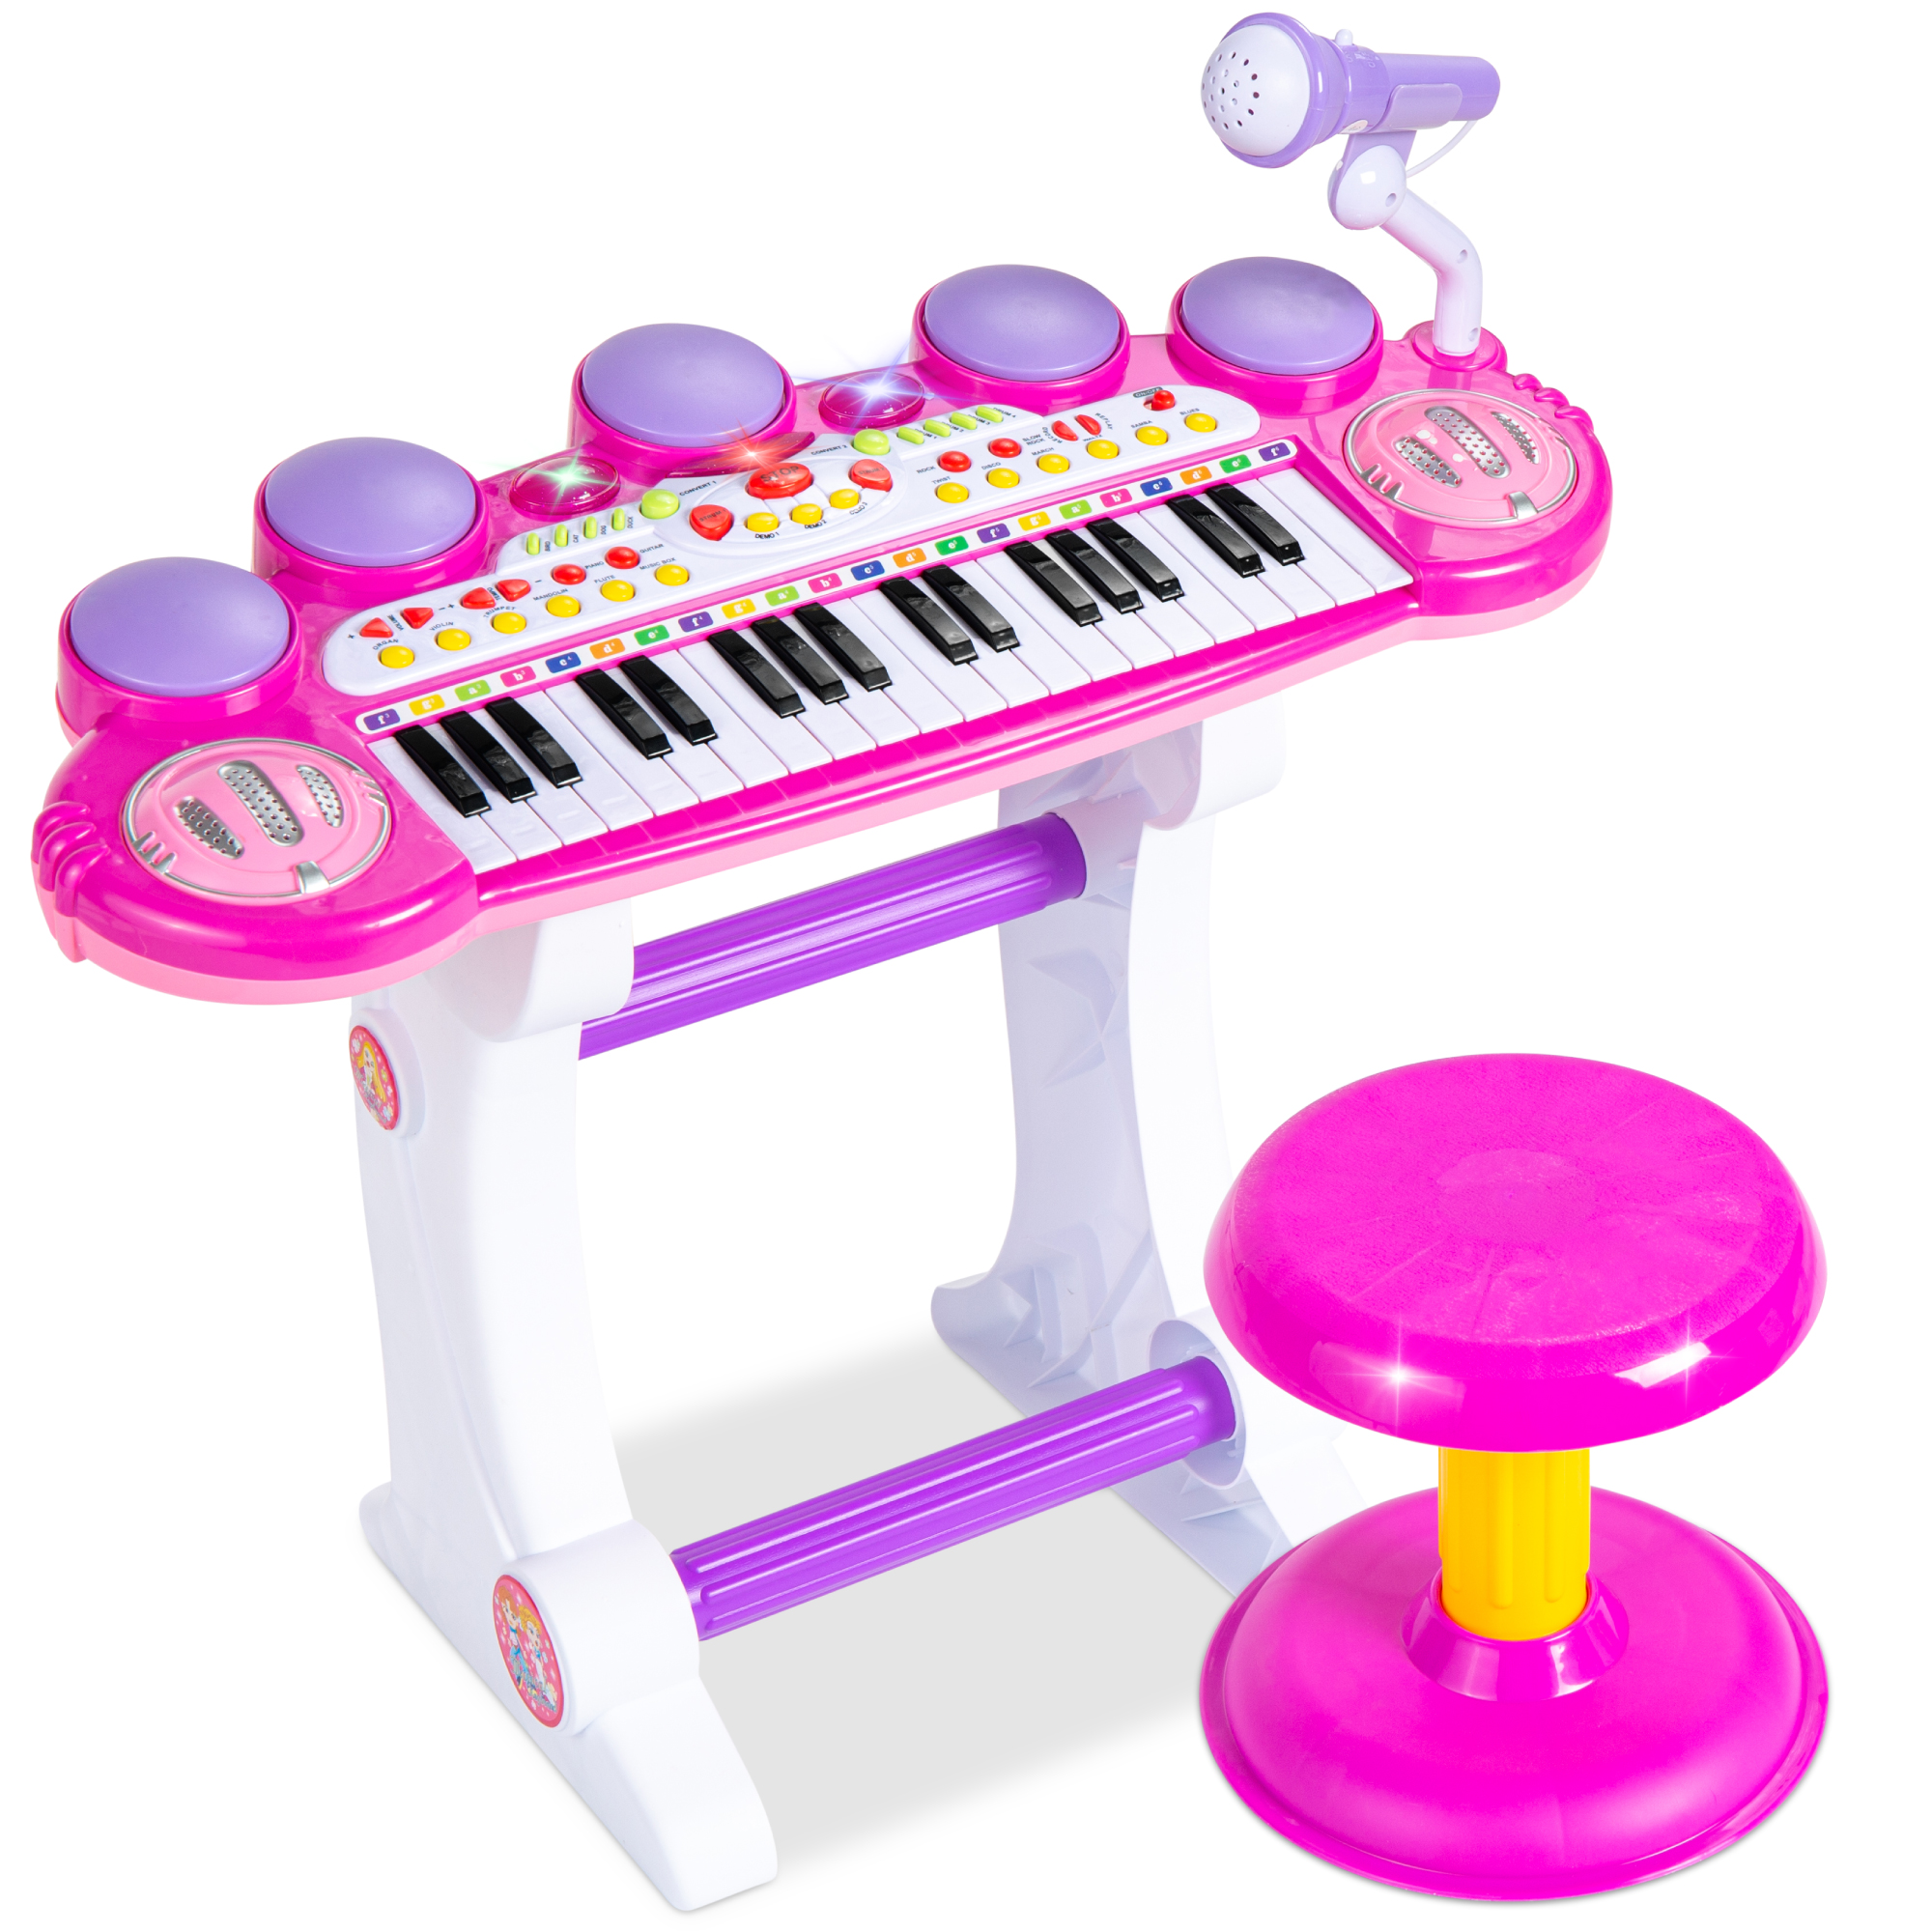 Best Choice Products 37-Key Kids Electronic Piano Keyboard w/ Multiple Sounds, Lights Microphone, Stool - Pink - image 1 of 7